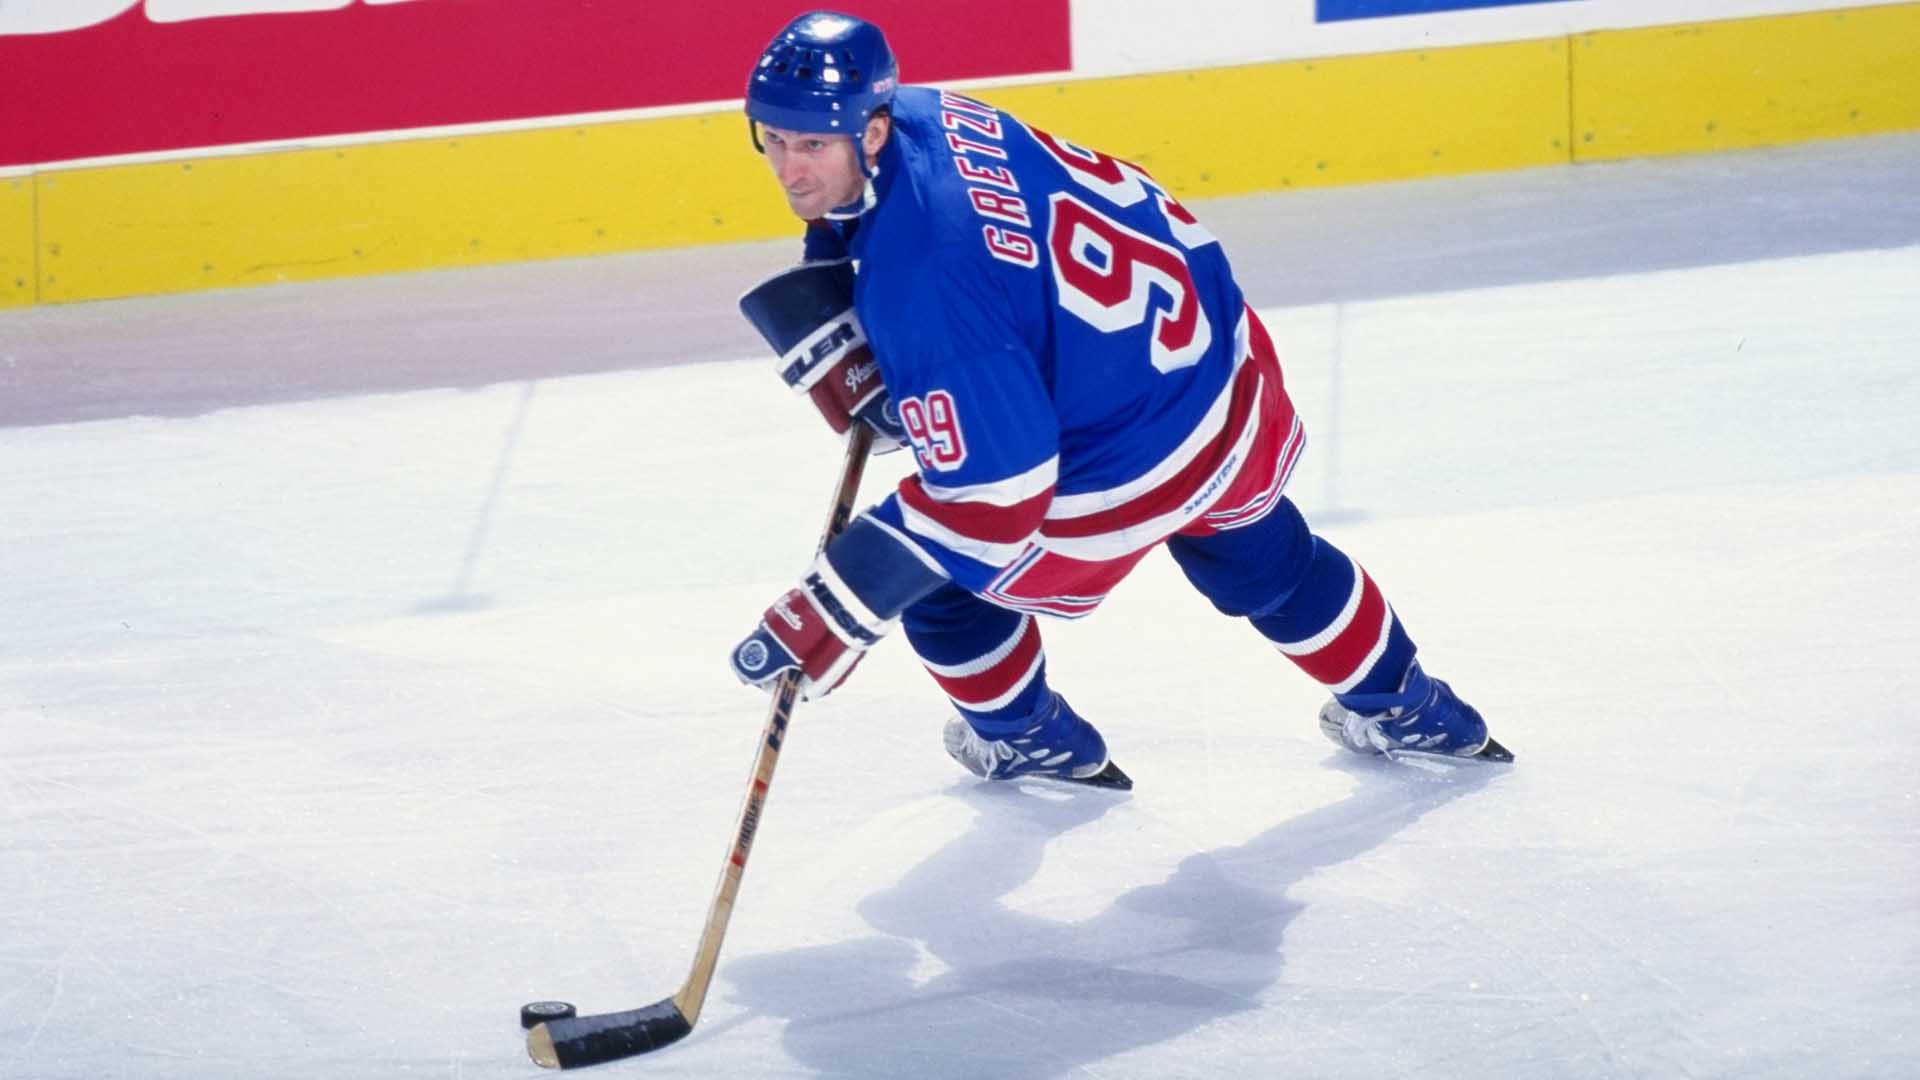 Wayne Gretzky has set records many think will stand the test of time.